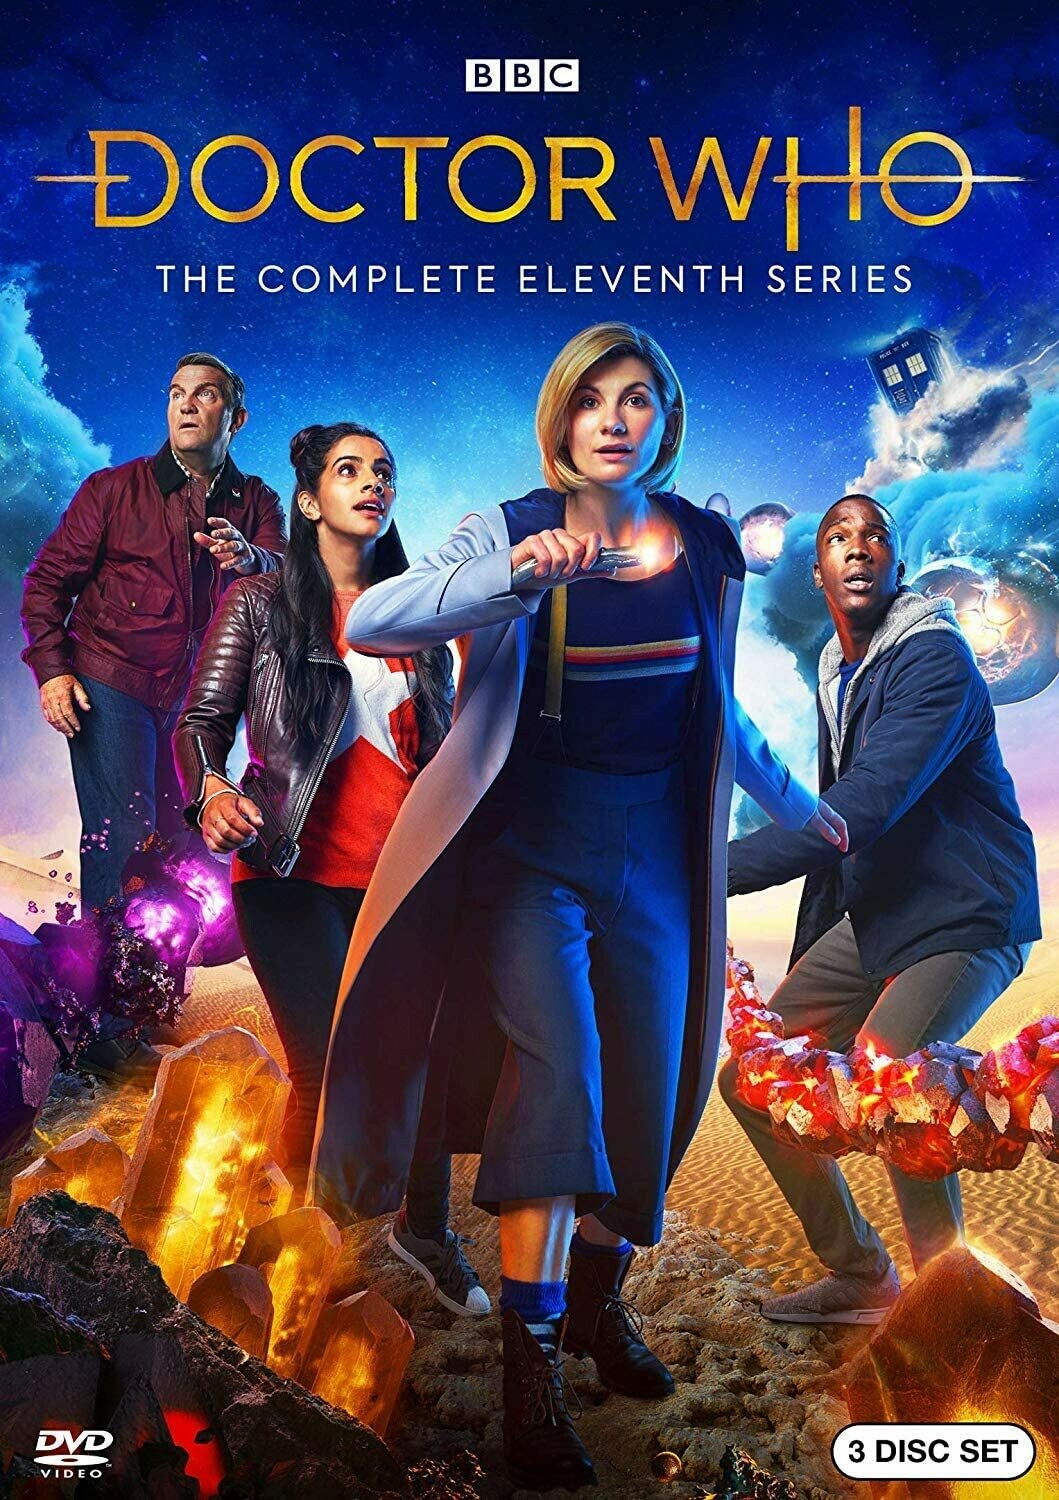 Doctor Who The Complete Eleventh Series (7 day rental)